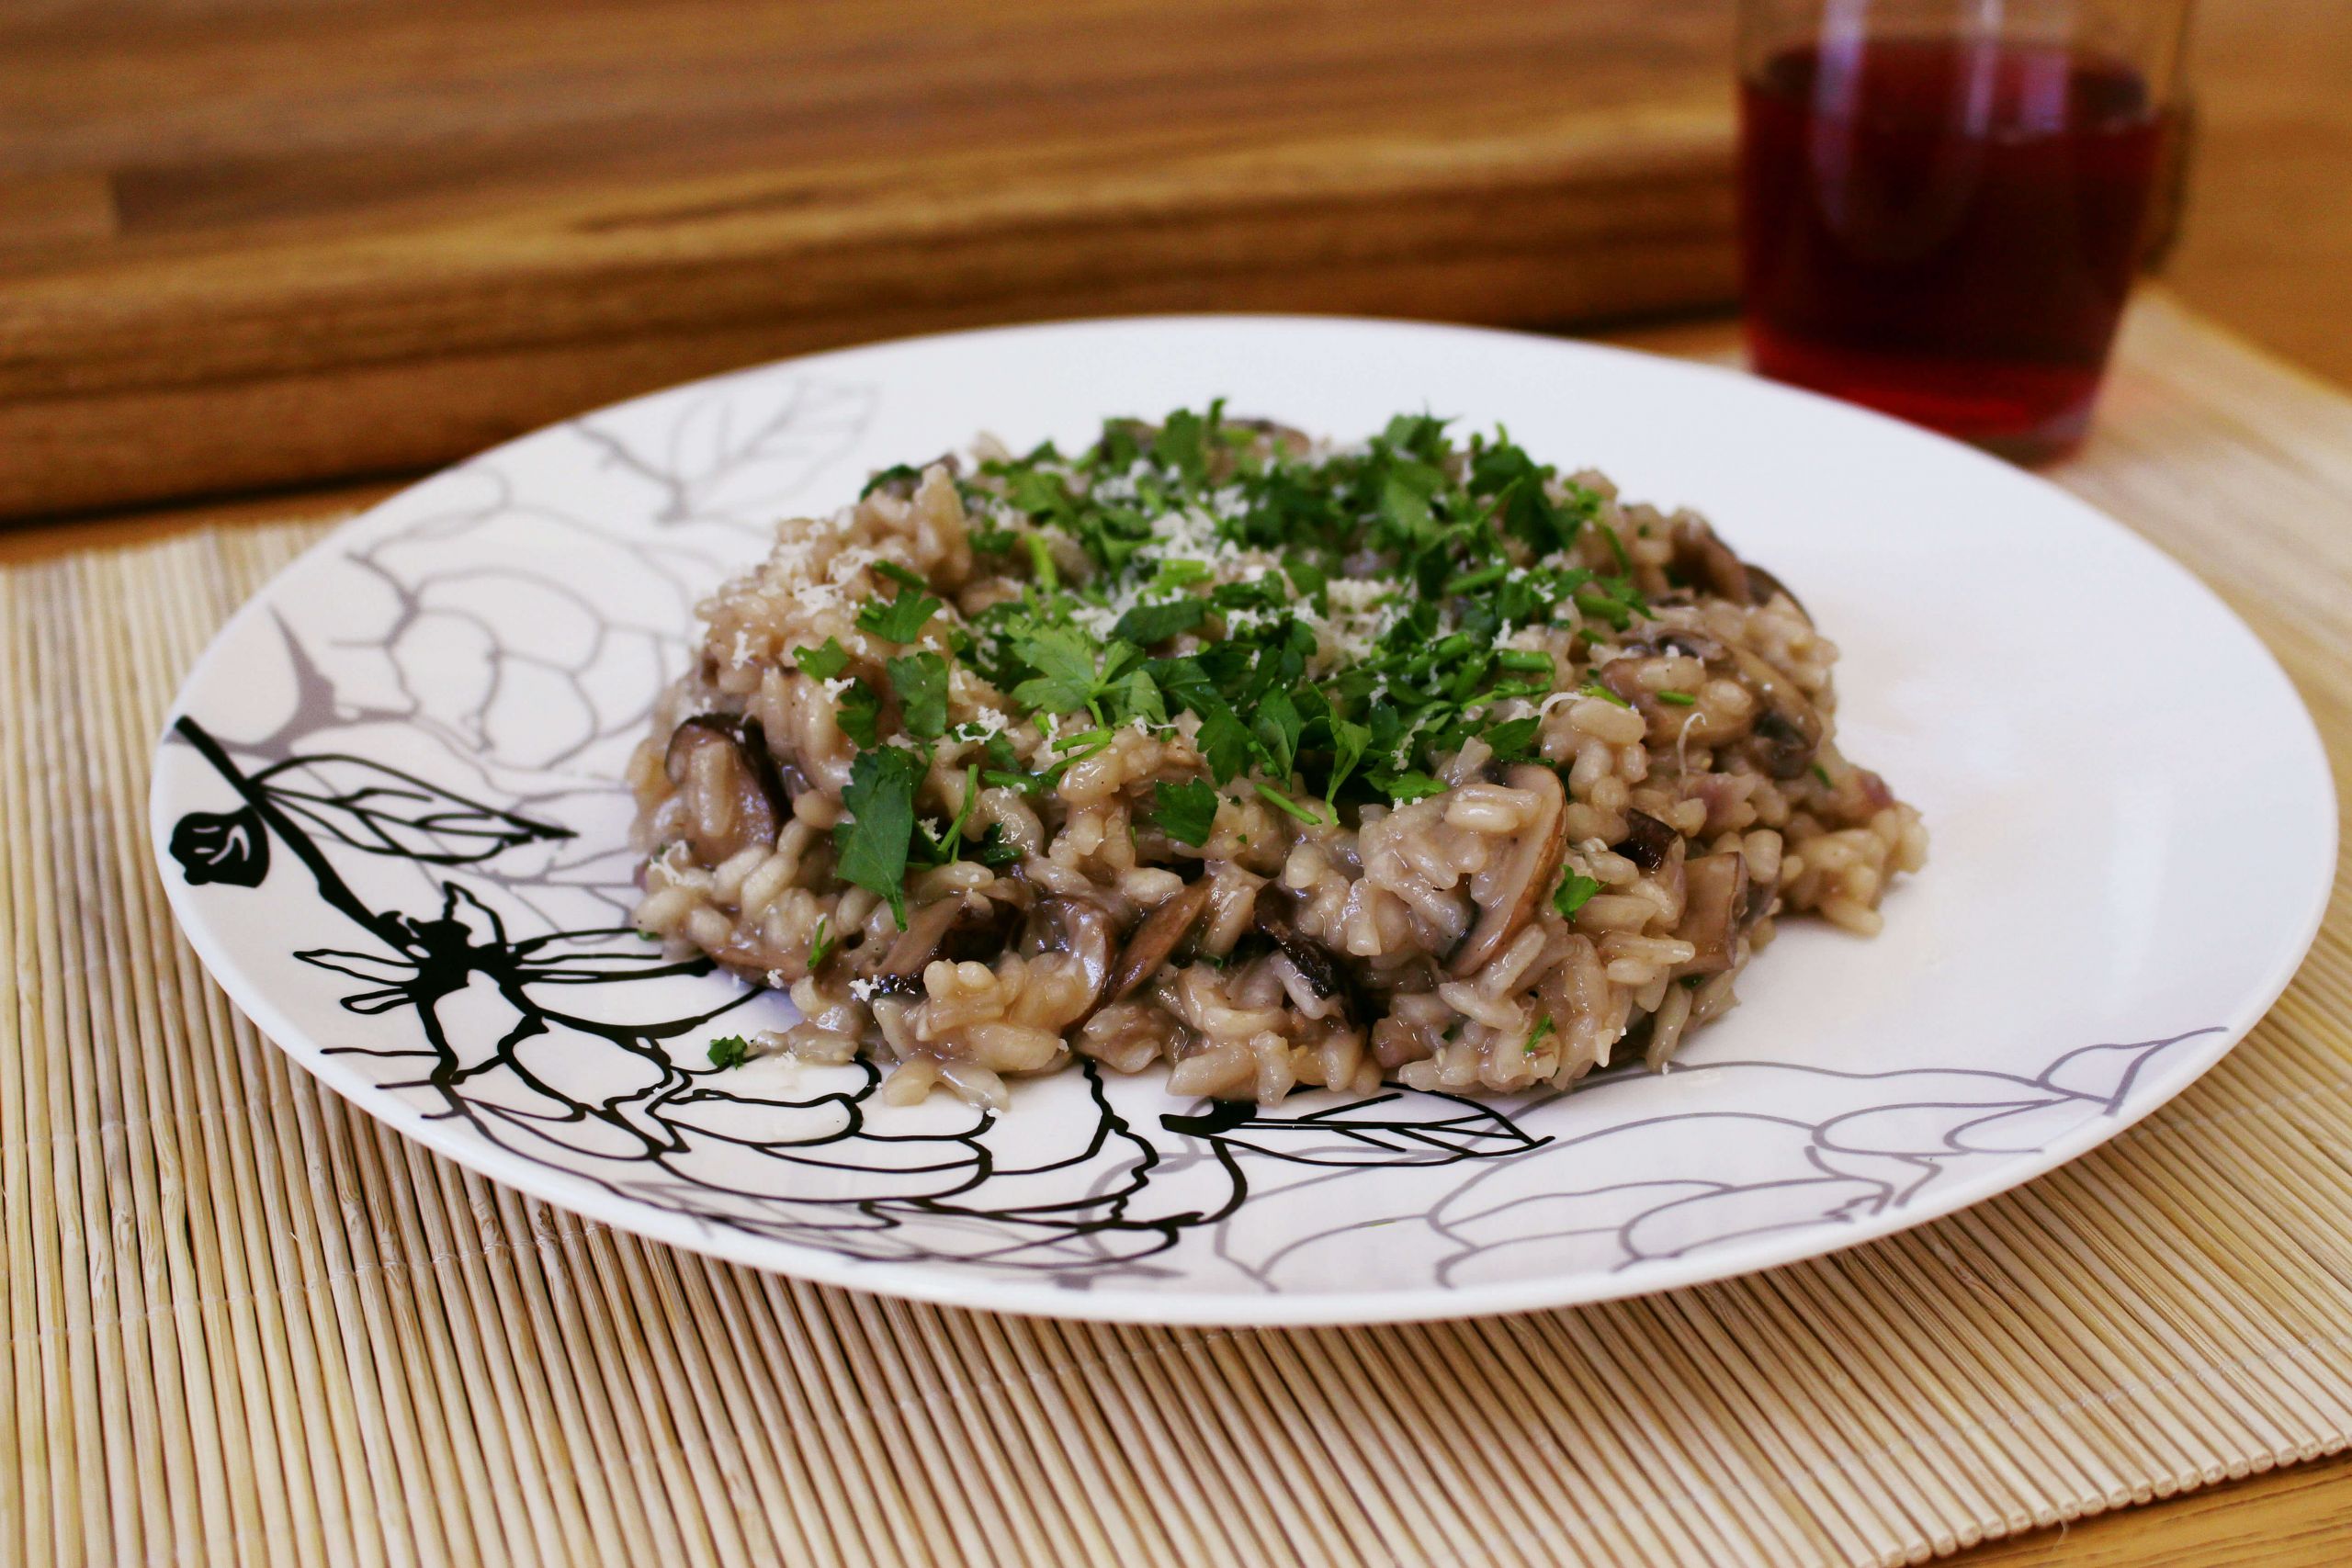 Gourmet Mushroom Risotto Beautiful Gourmet Mushroom Risotto Very Tasty and Quick to Make